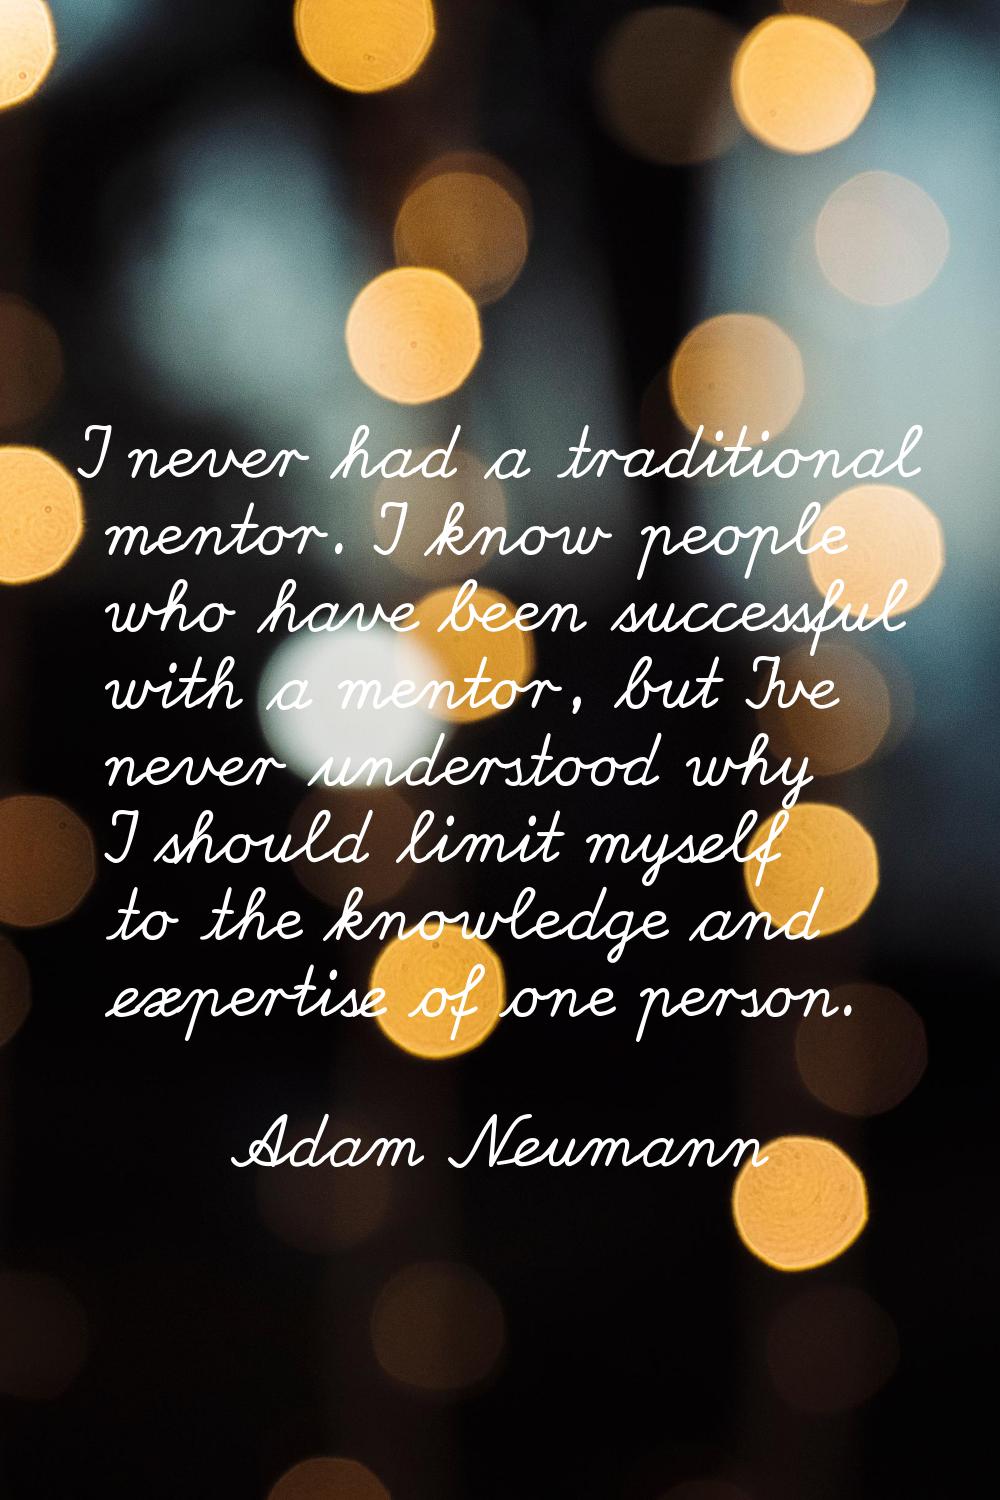 I never had a traditional mentor. I know people who have been successful with a mentor, but I've ne